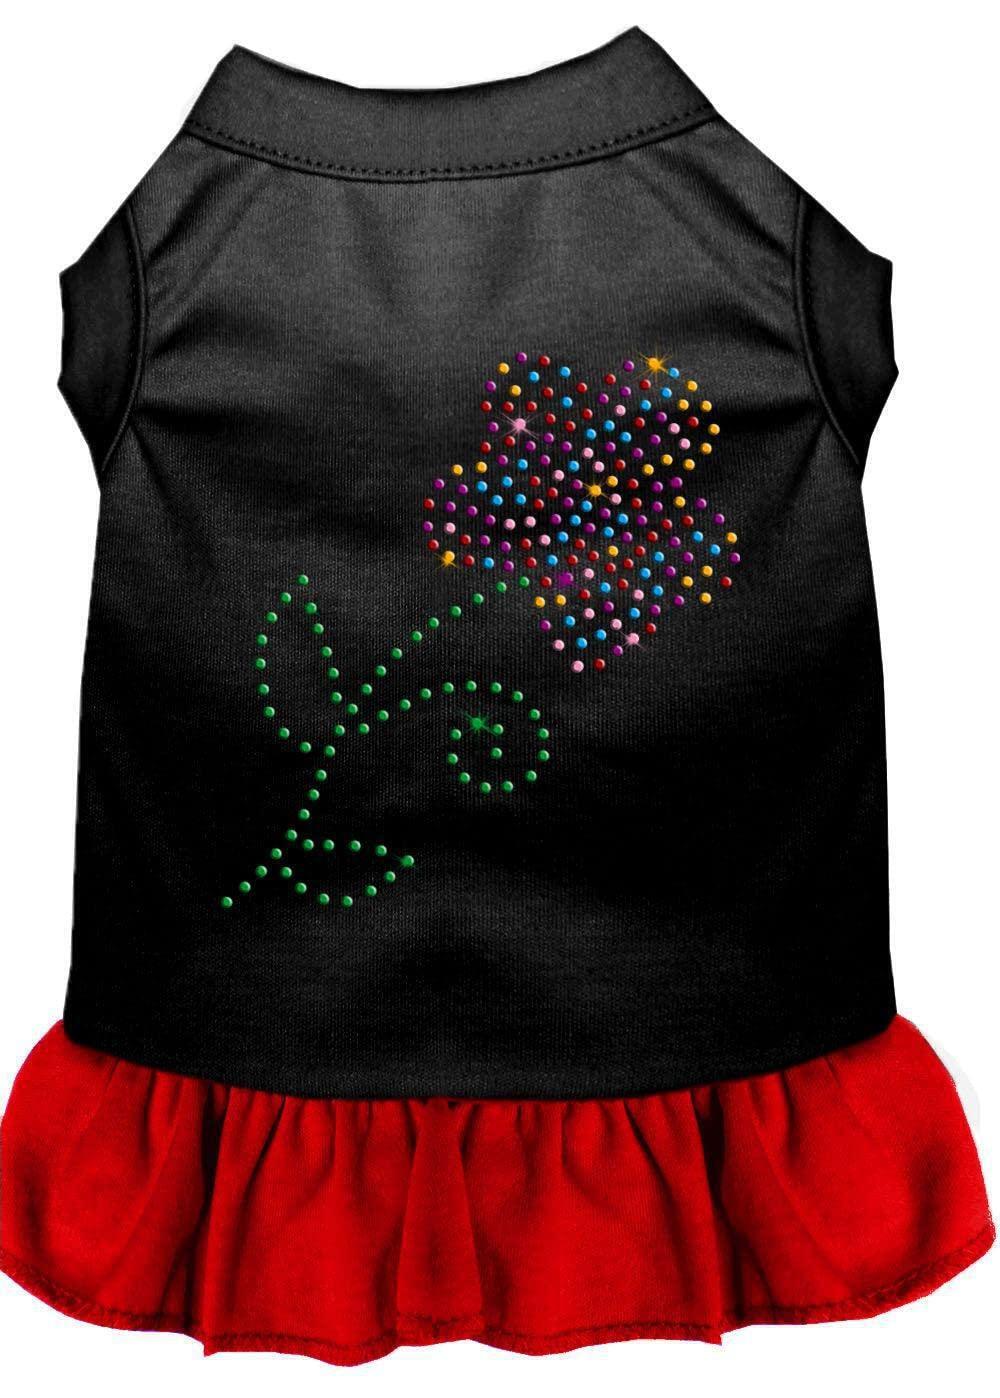 Mirage Pet Products Rhinestone Mulit Flower 8-Inch Pet Dress, X-Small, Black with Red